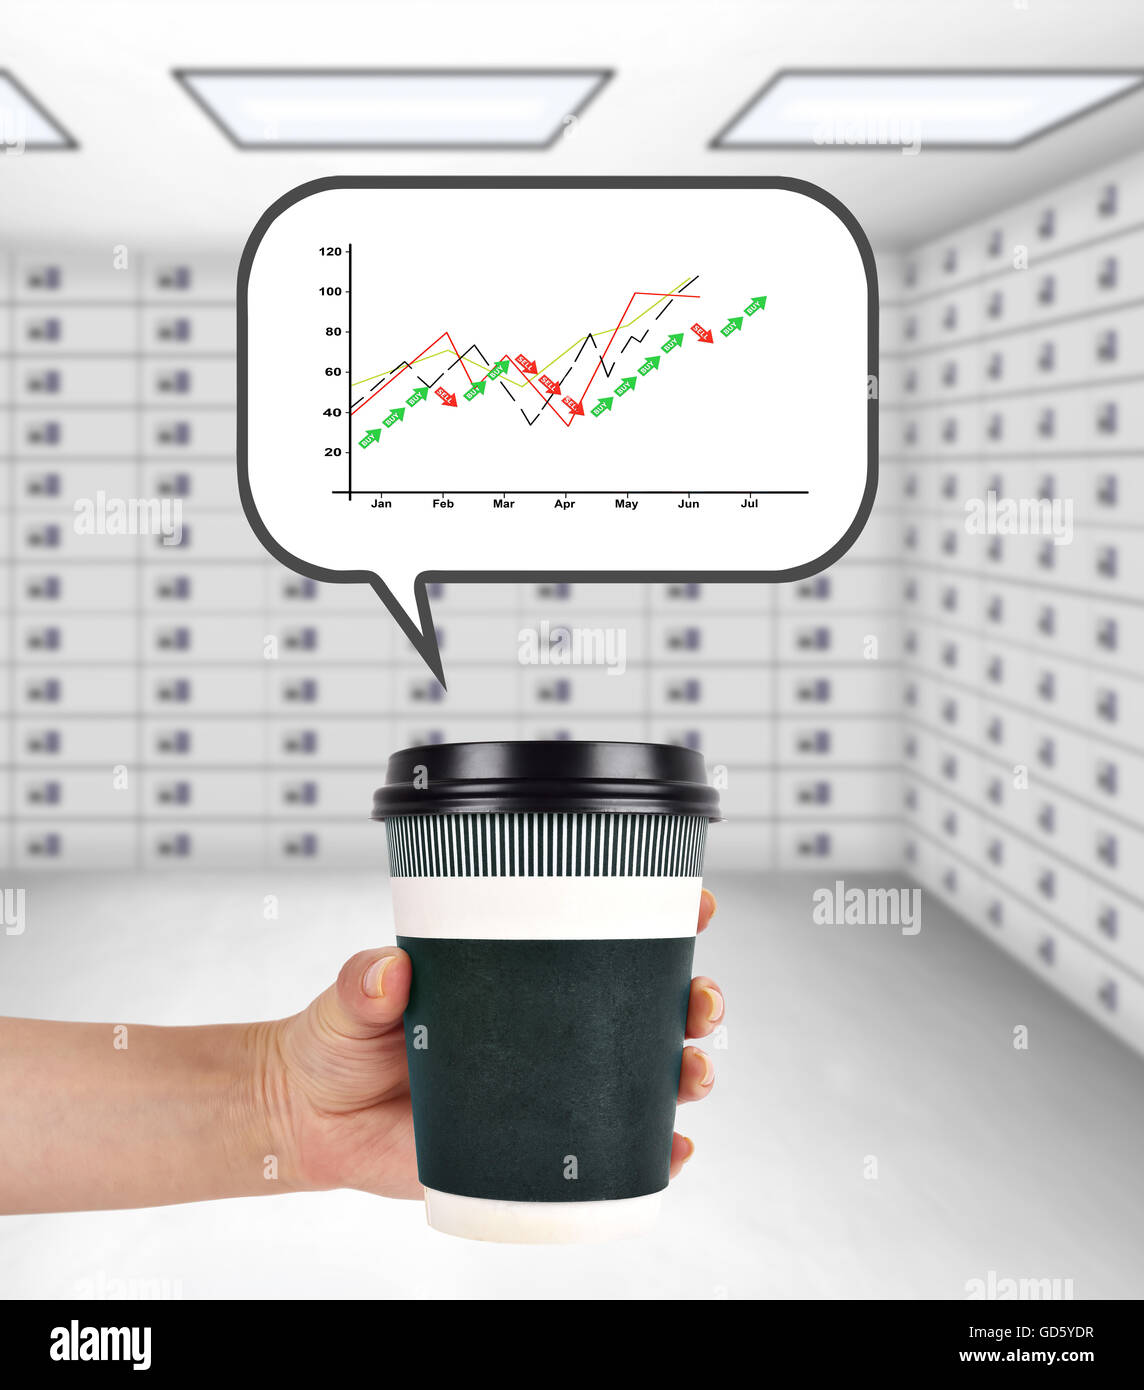 hand holding disposable coffee cup with stock chart Stock Photo